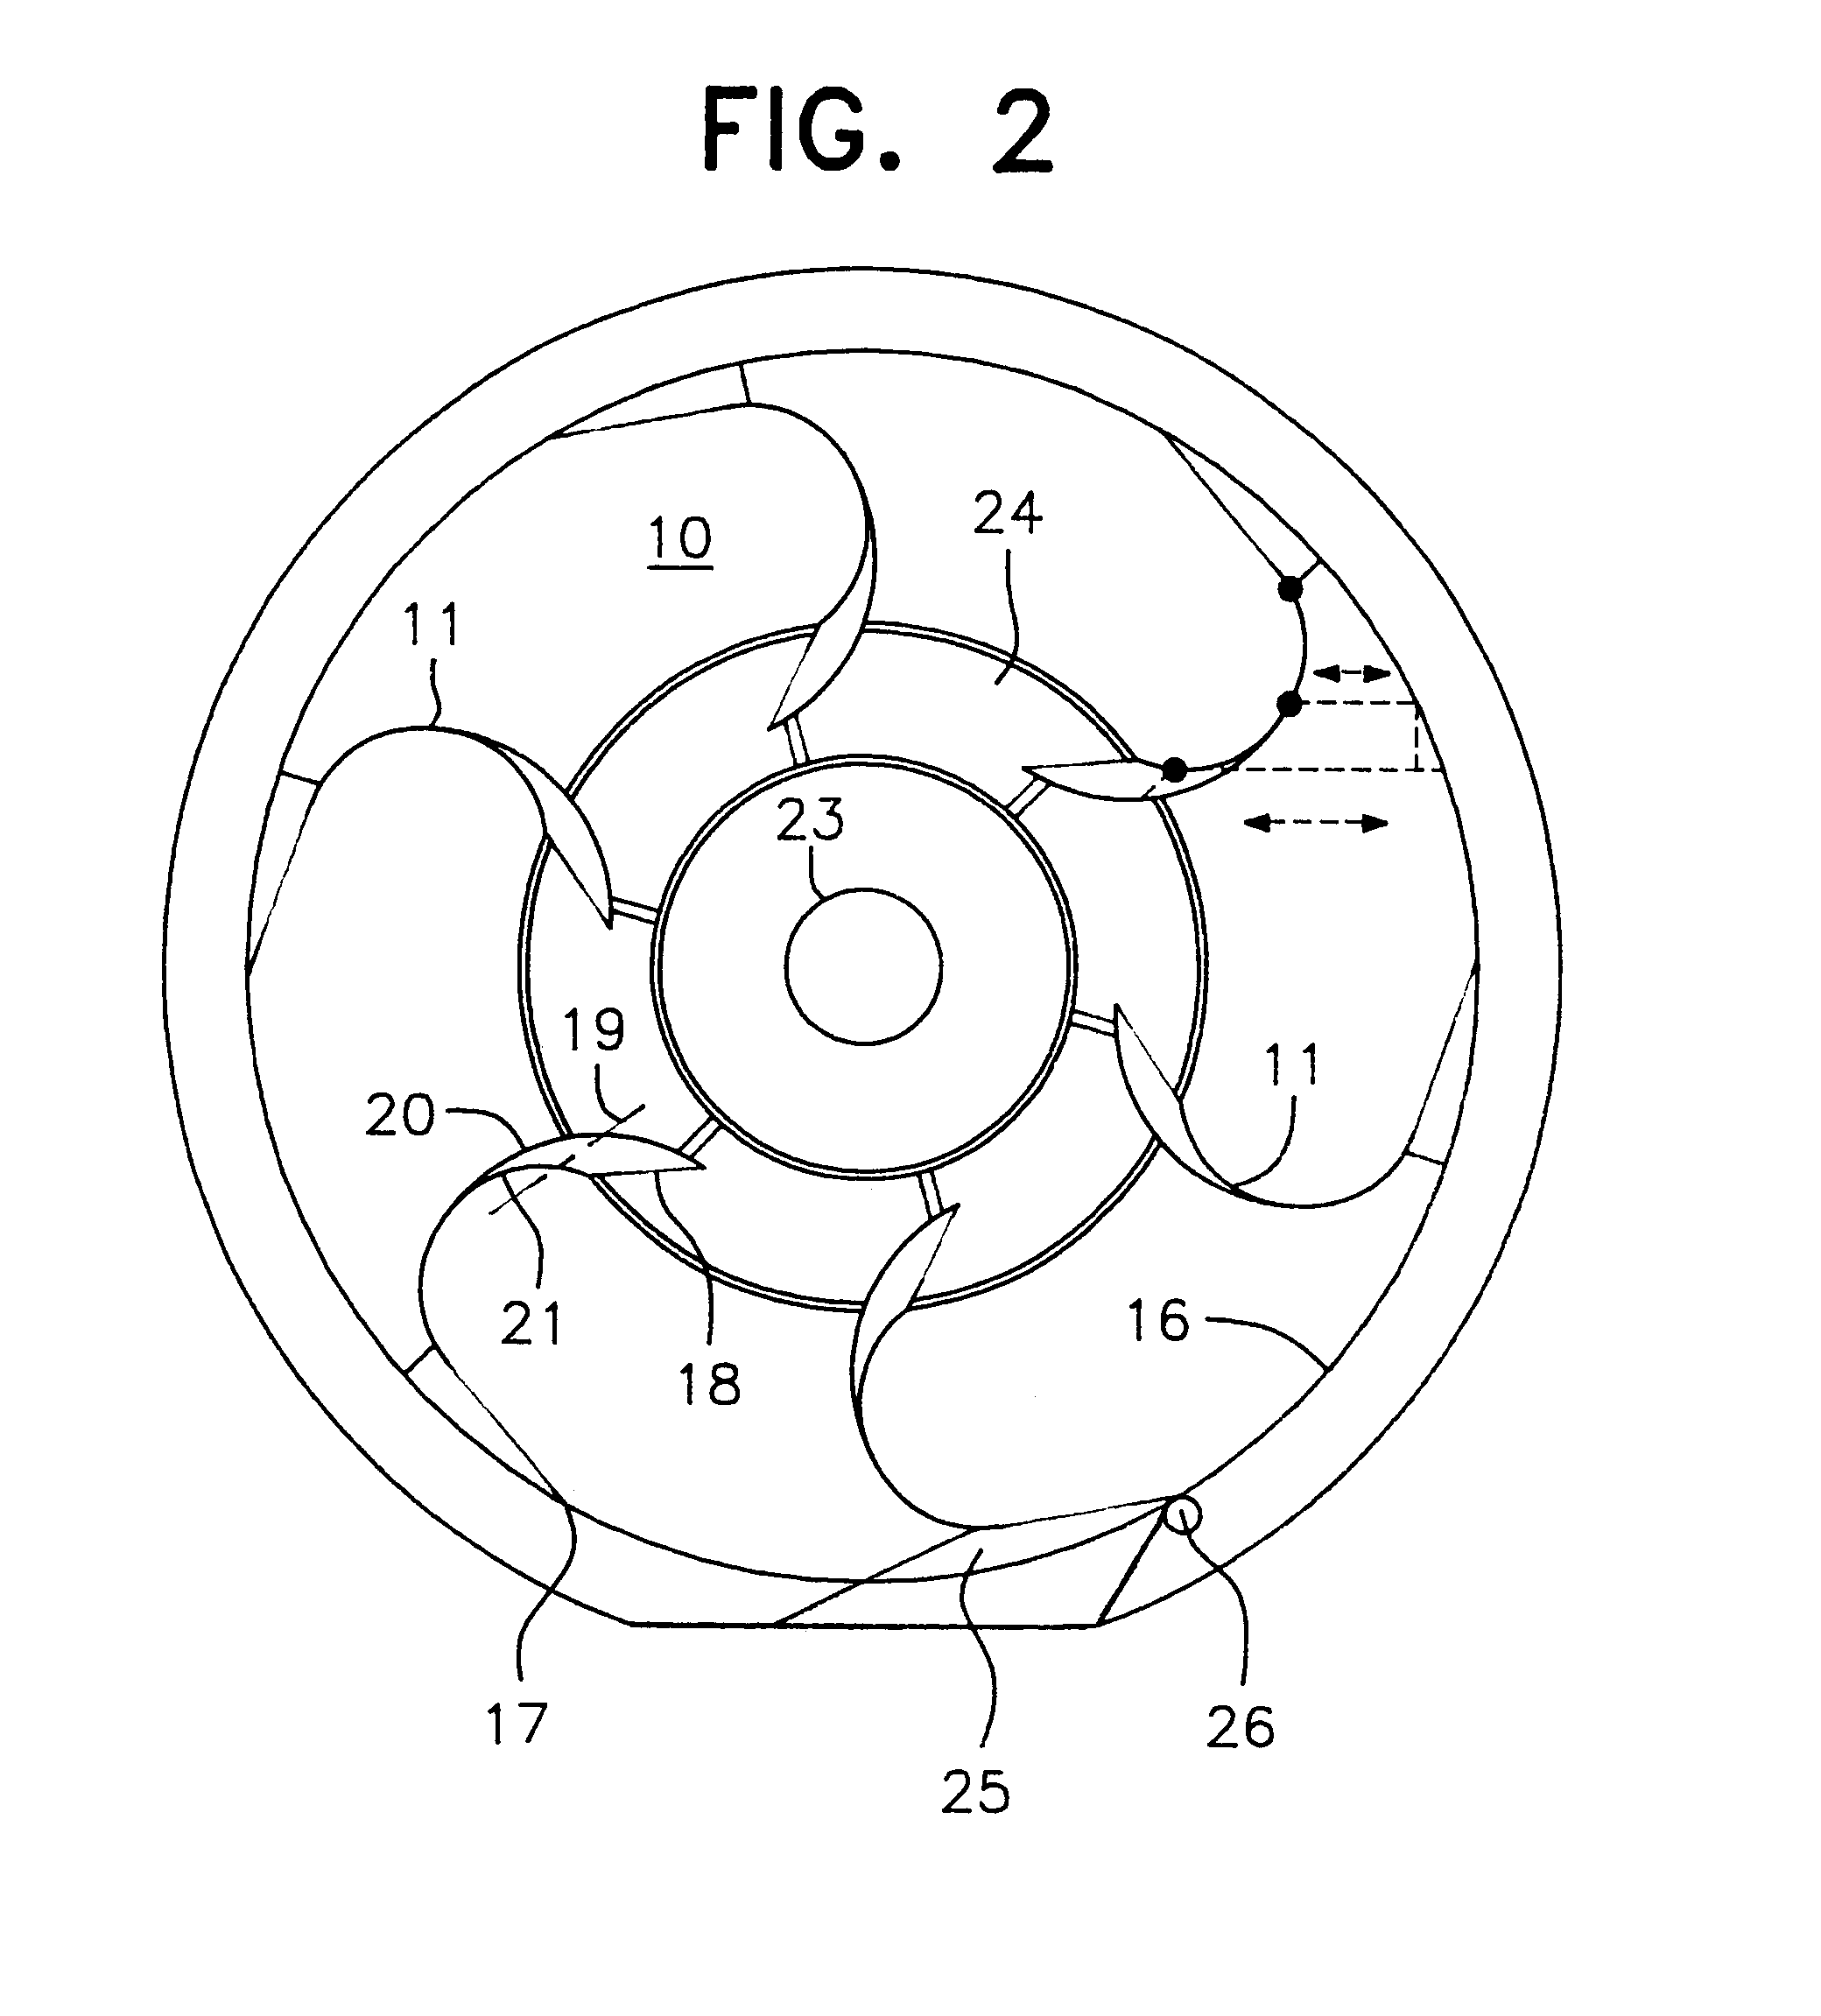 Device and method for drying pourable products